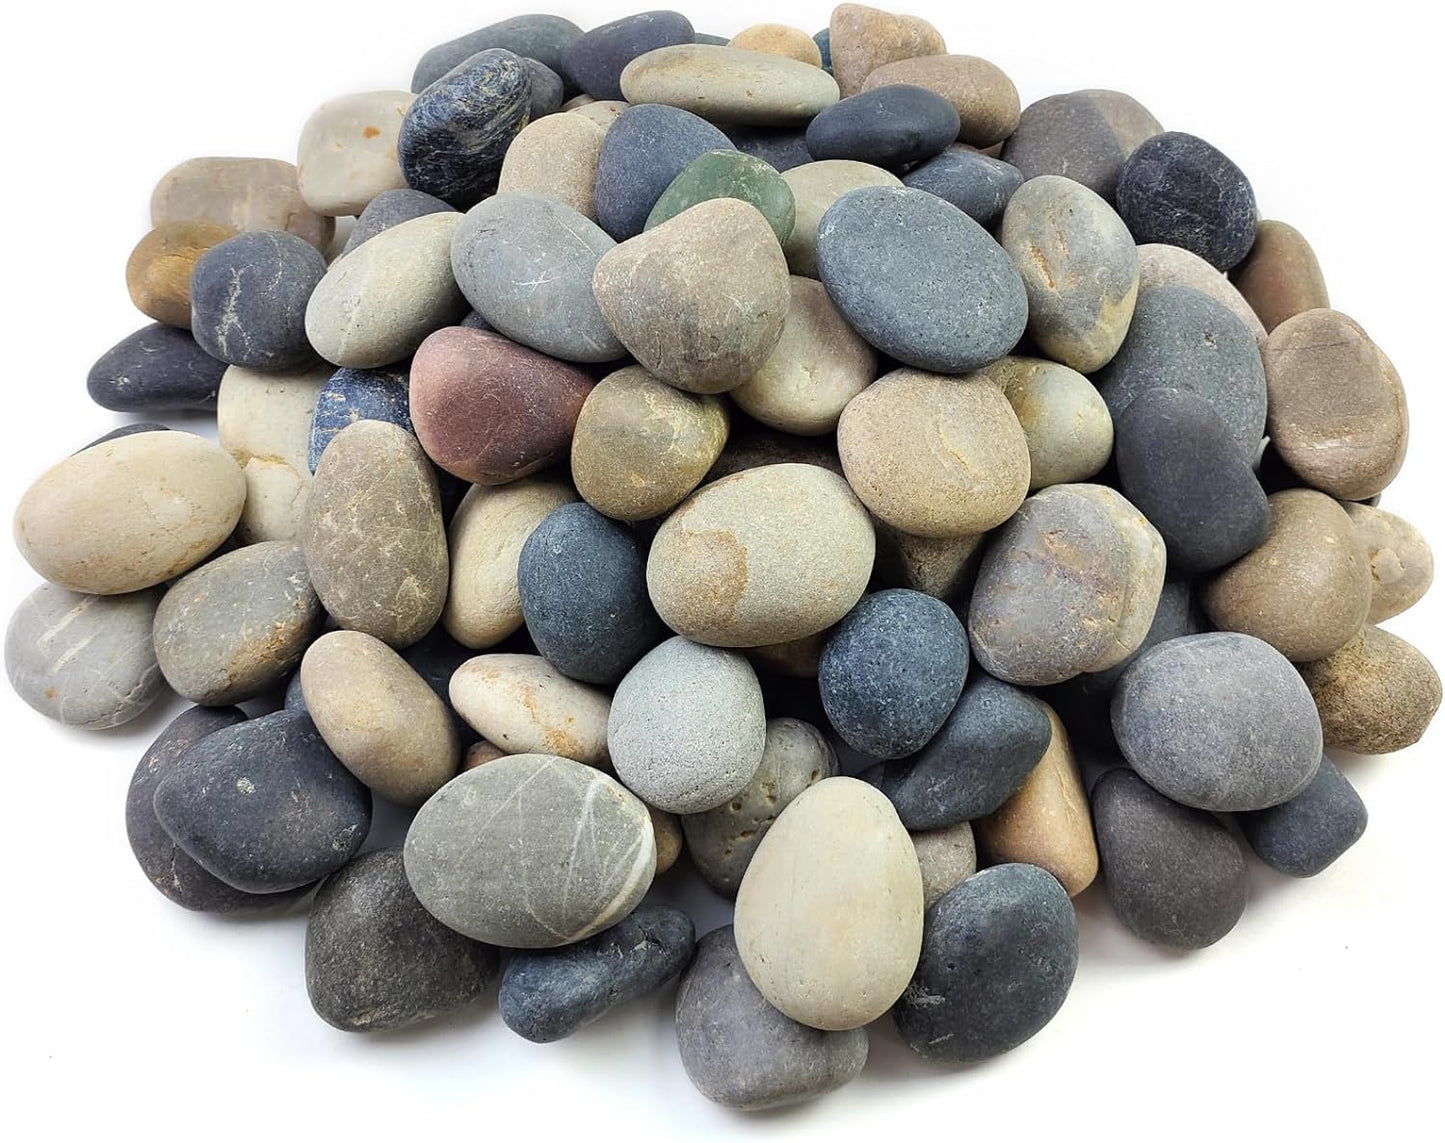 20 Lb Natural Unpolished Bulk Rocks Mexican Beach Pebbles, 2-3 Inch Decorative River Rocks for Landscaping Garden Paving Plant Rocks Crafting Walkways and Outdoor Decorative Stone